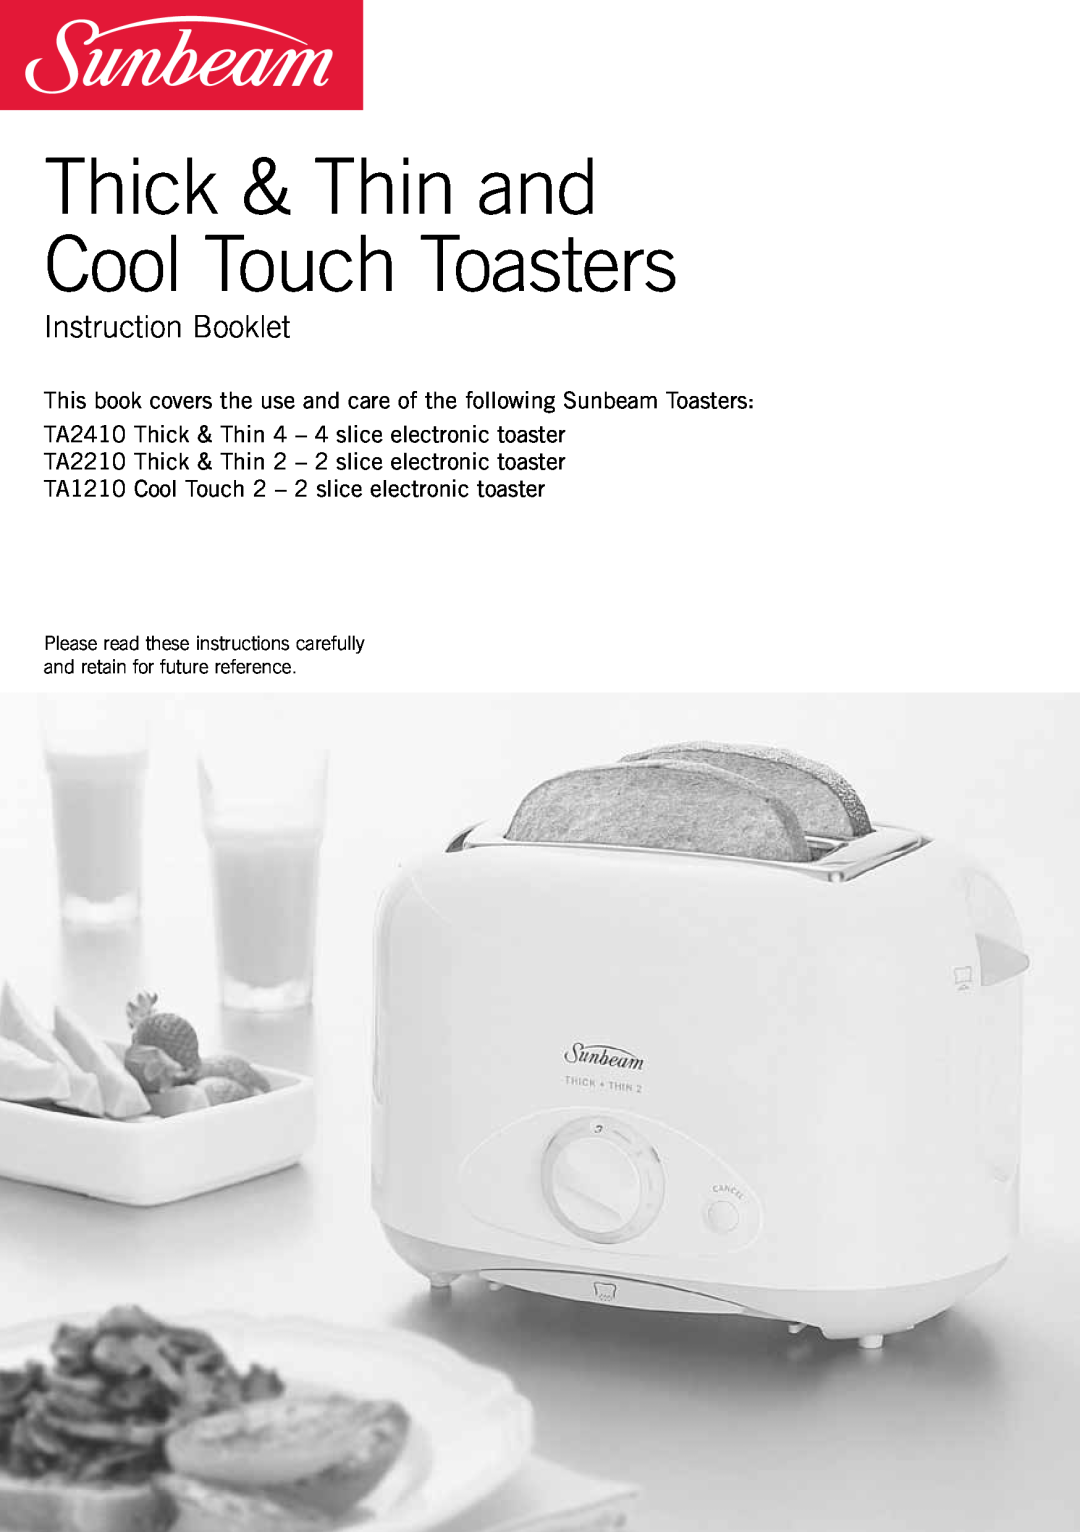 Sunbeam TA1210, TA2210, TA2410 manual Instruction Booklet, Thick & Thin and Cool Touch Toasters 